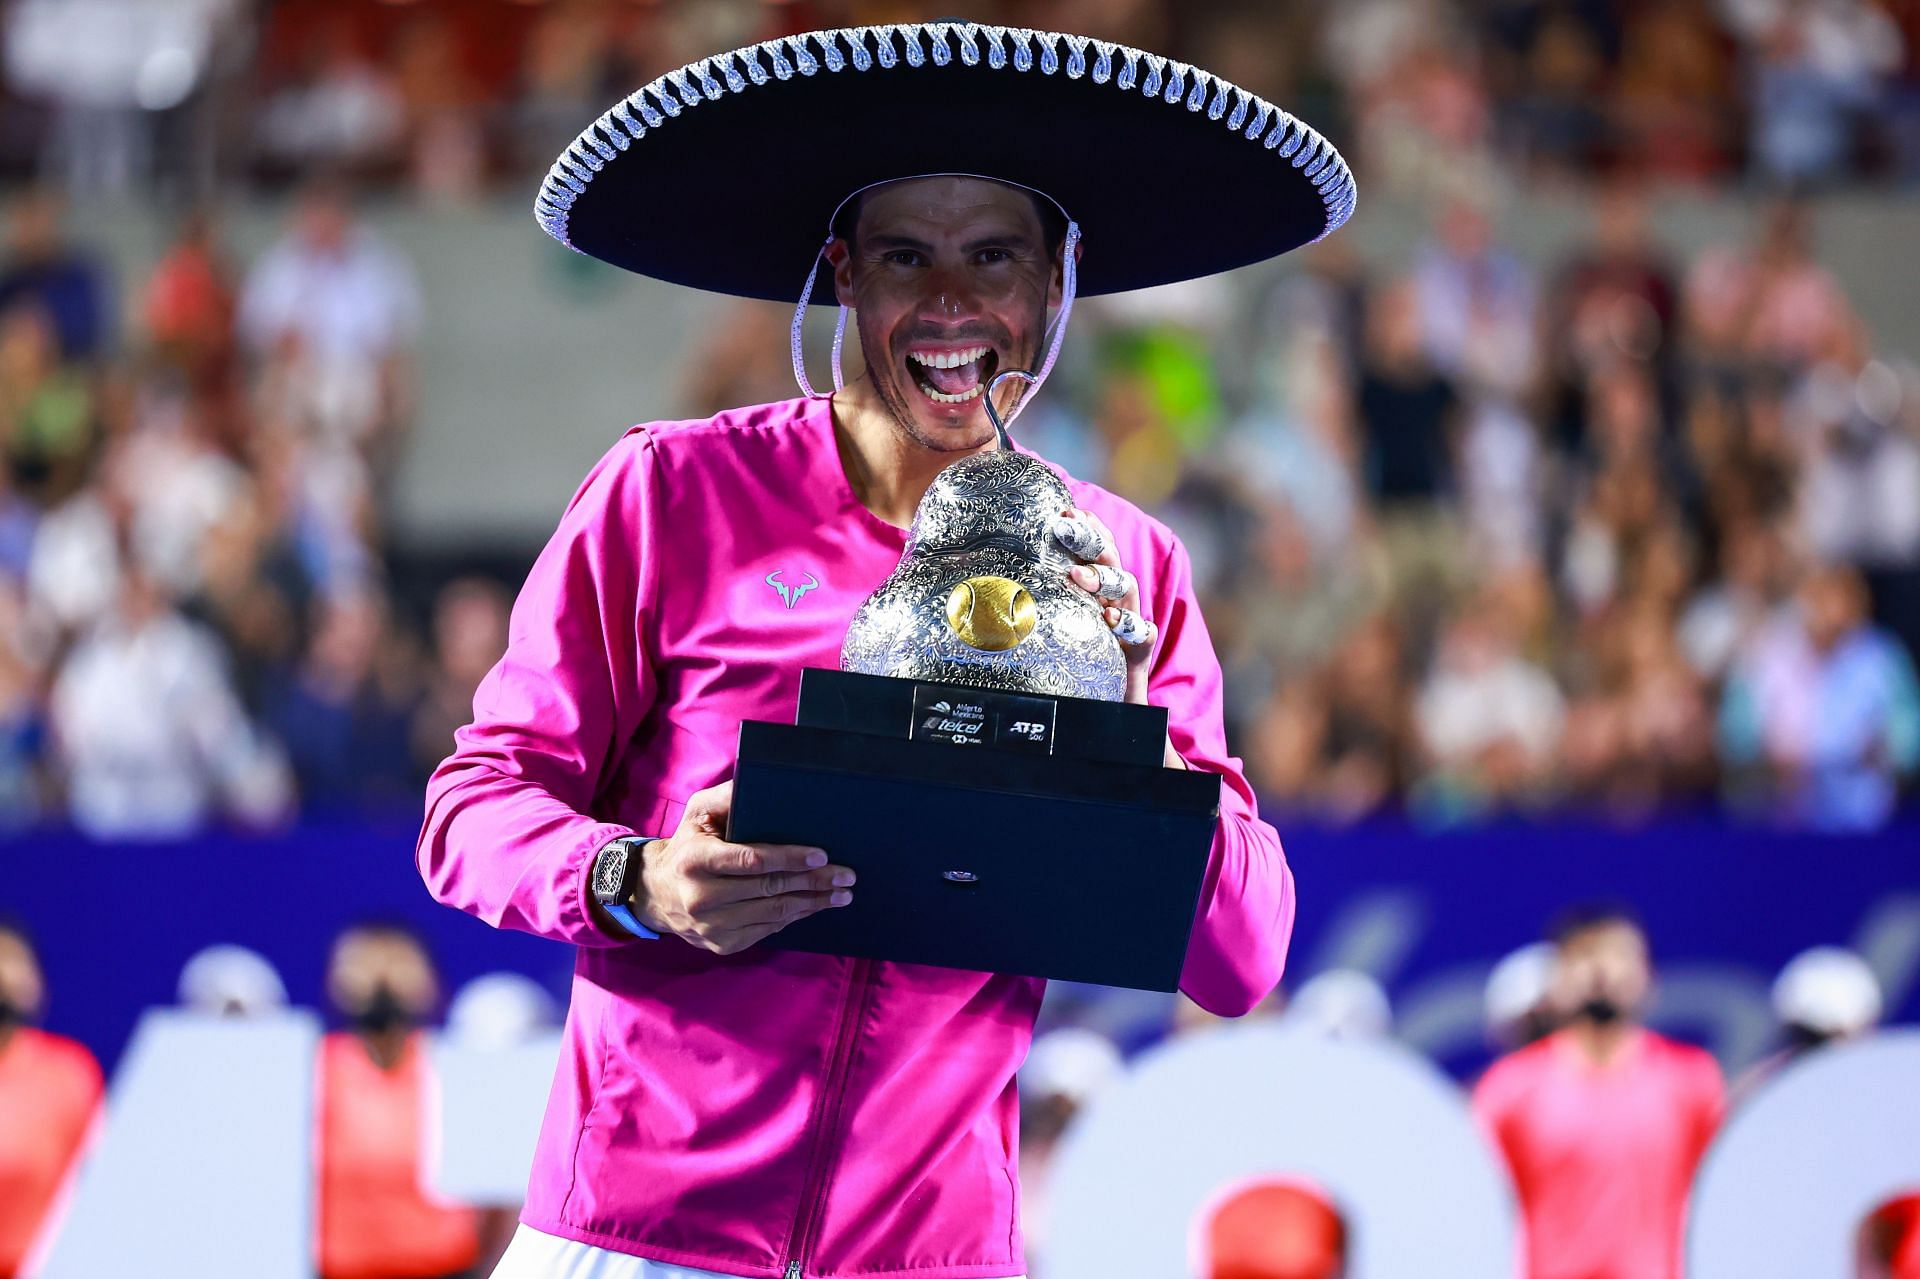 Nadal with the Acapulco Open title